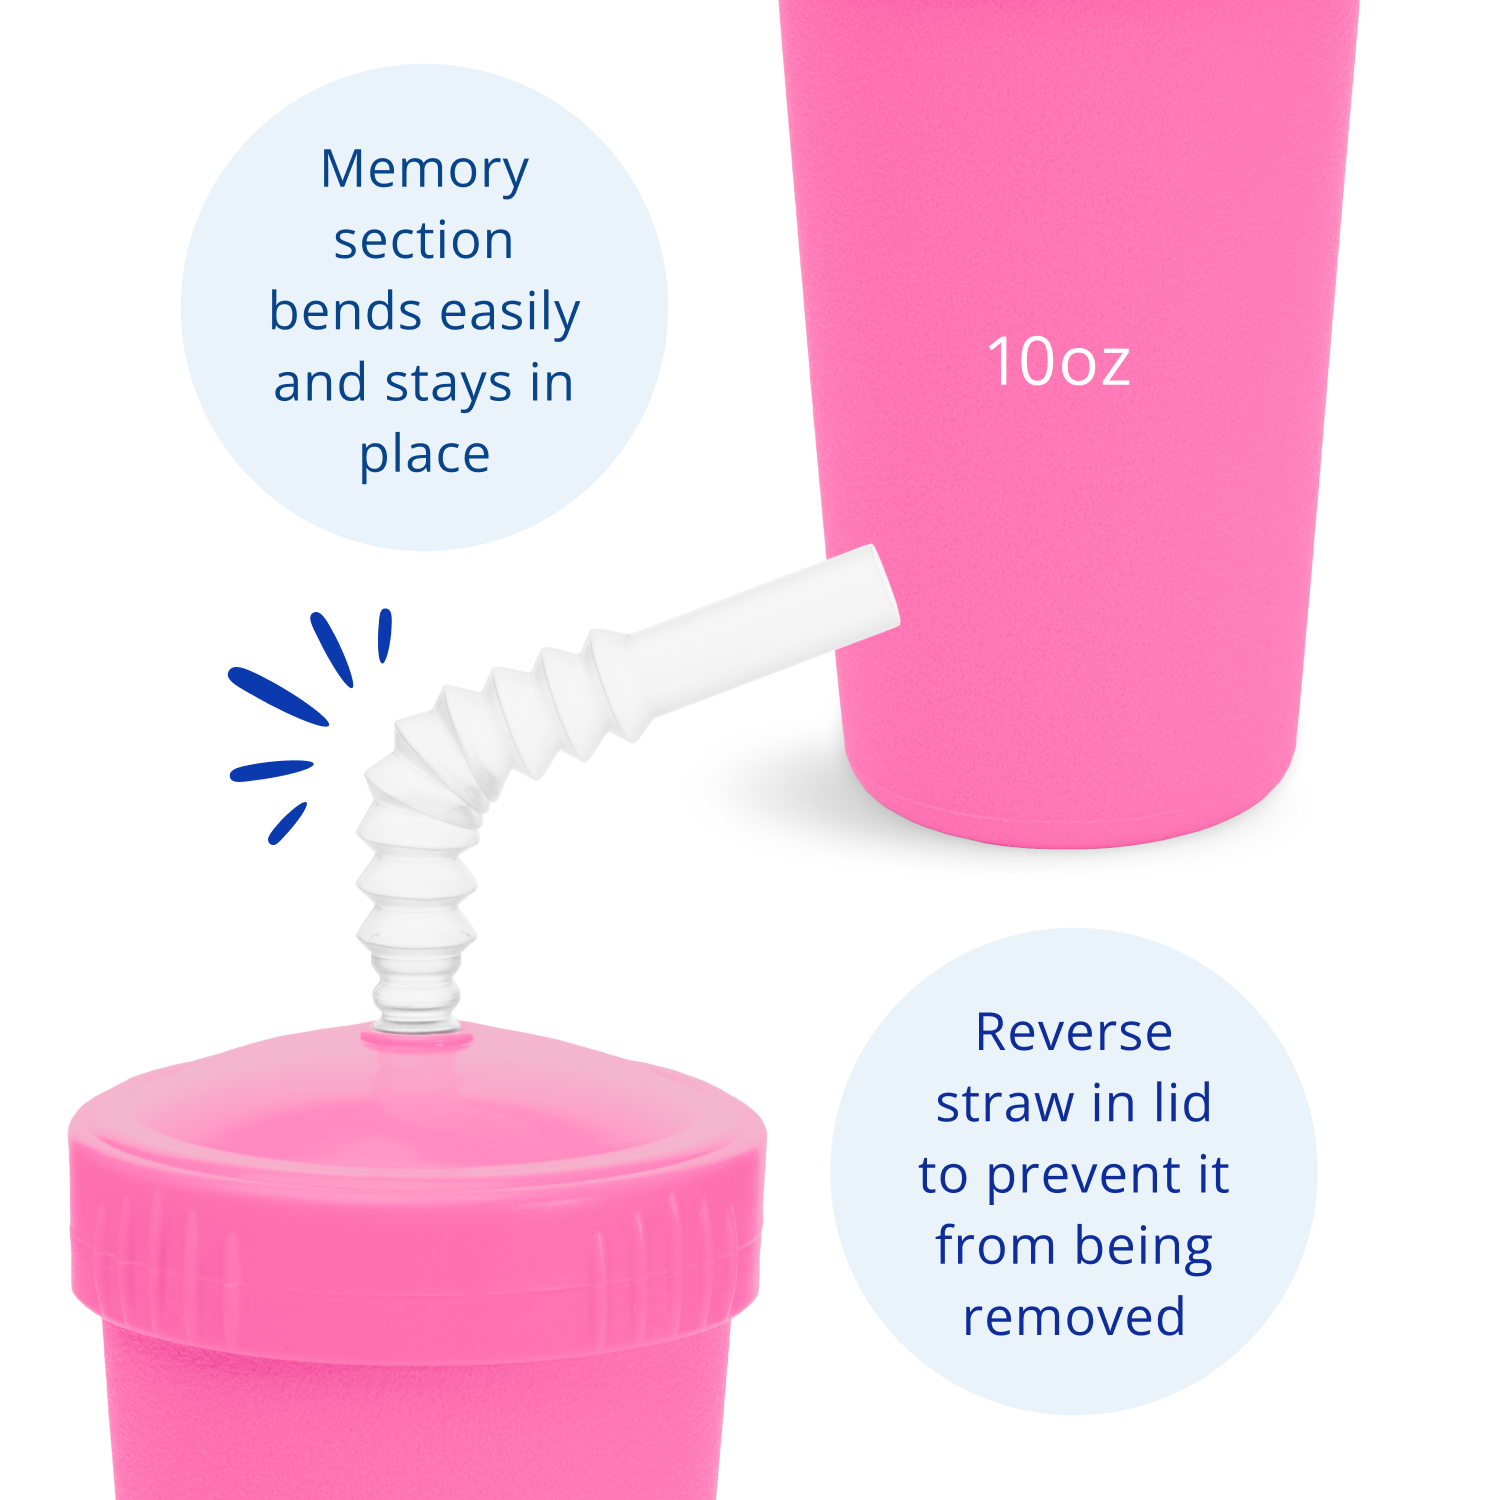 Re Play Made in USA 10 oz. Straw Cups for Toddlers, Pack of 4 - Reusable Kids Cups with Straws and Lids, Dishwasher/Microwave Safe - Toddler Cups